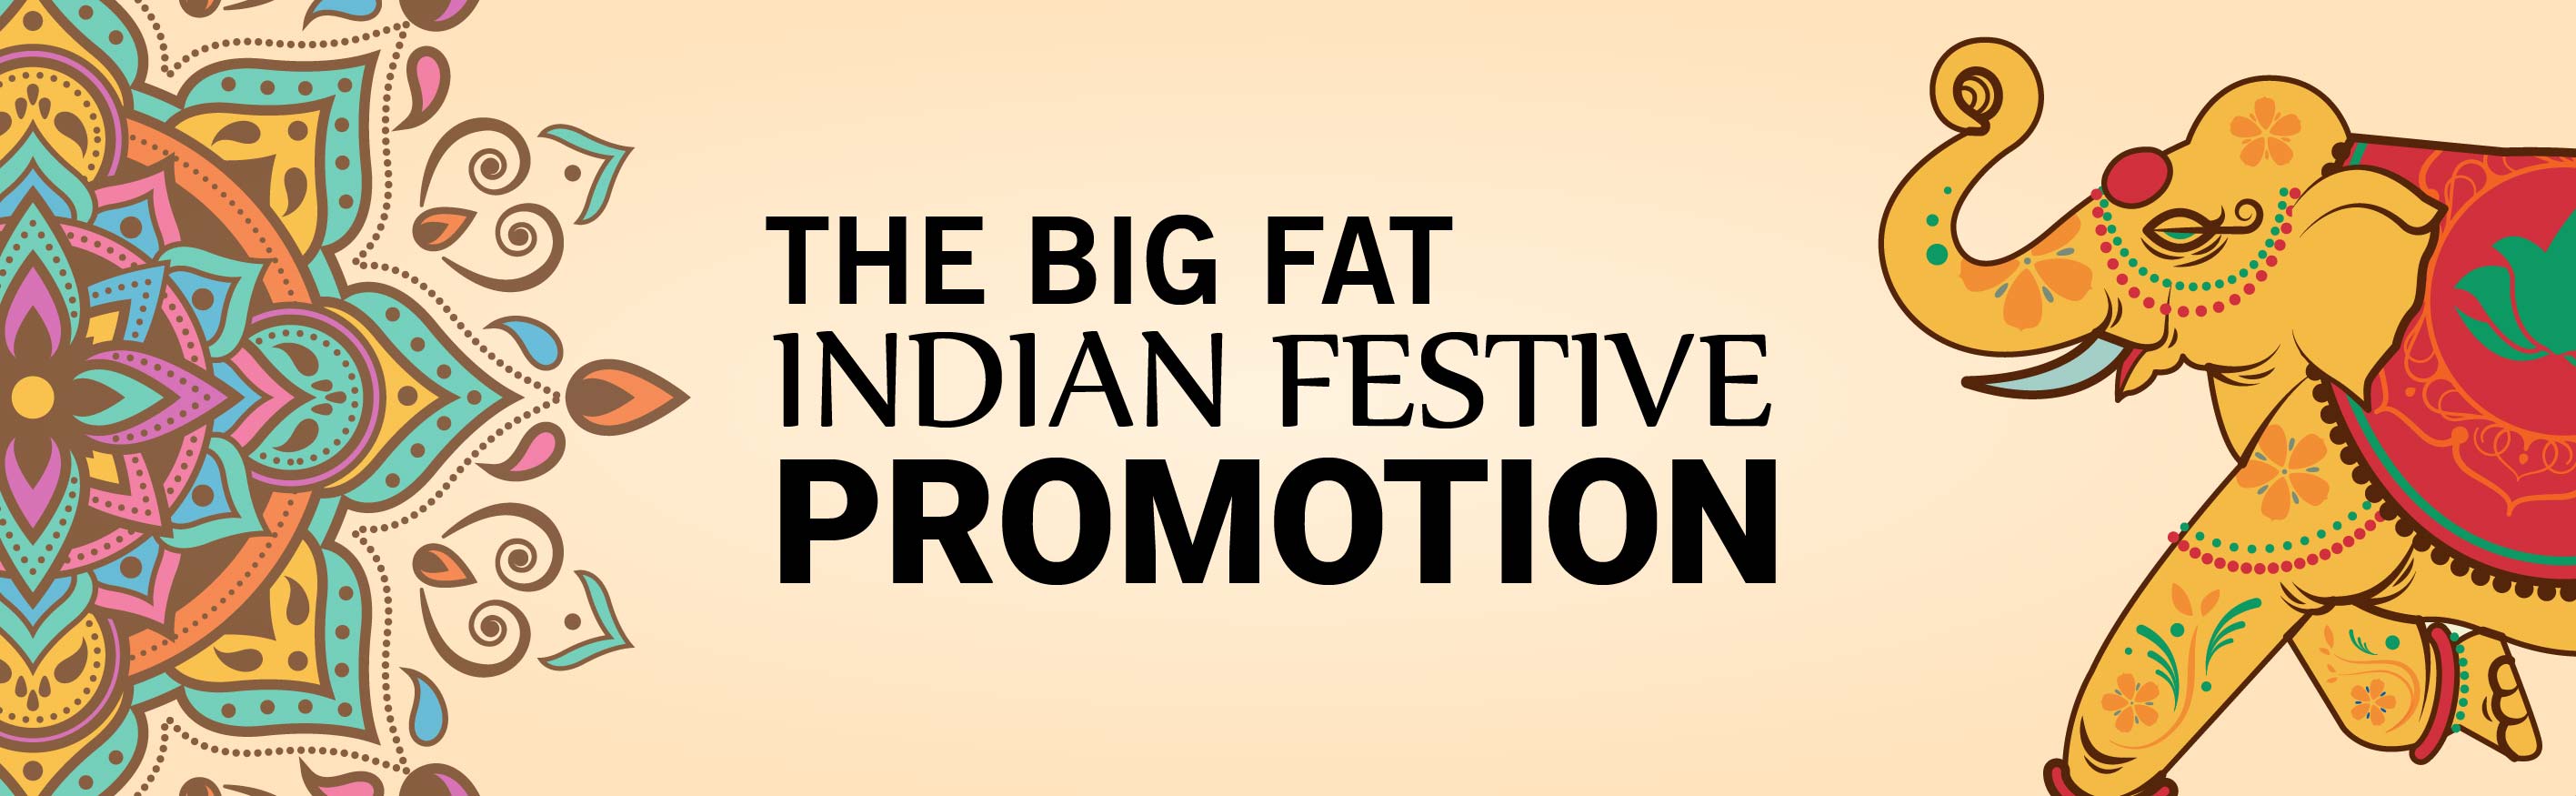 The Big Fat Indian Festive Promotion Banner